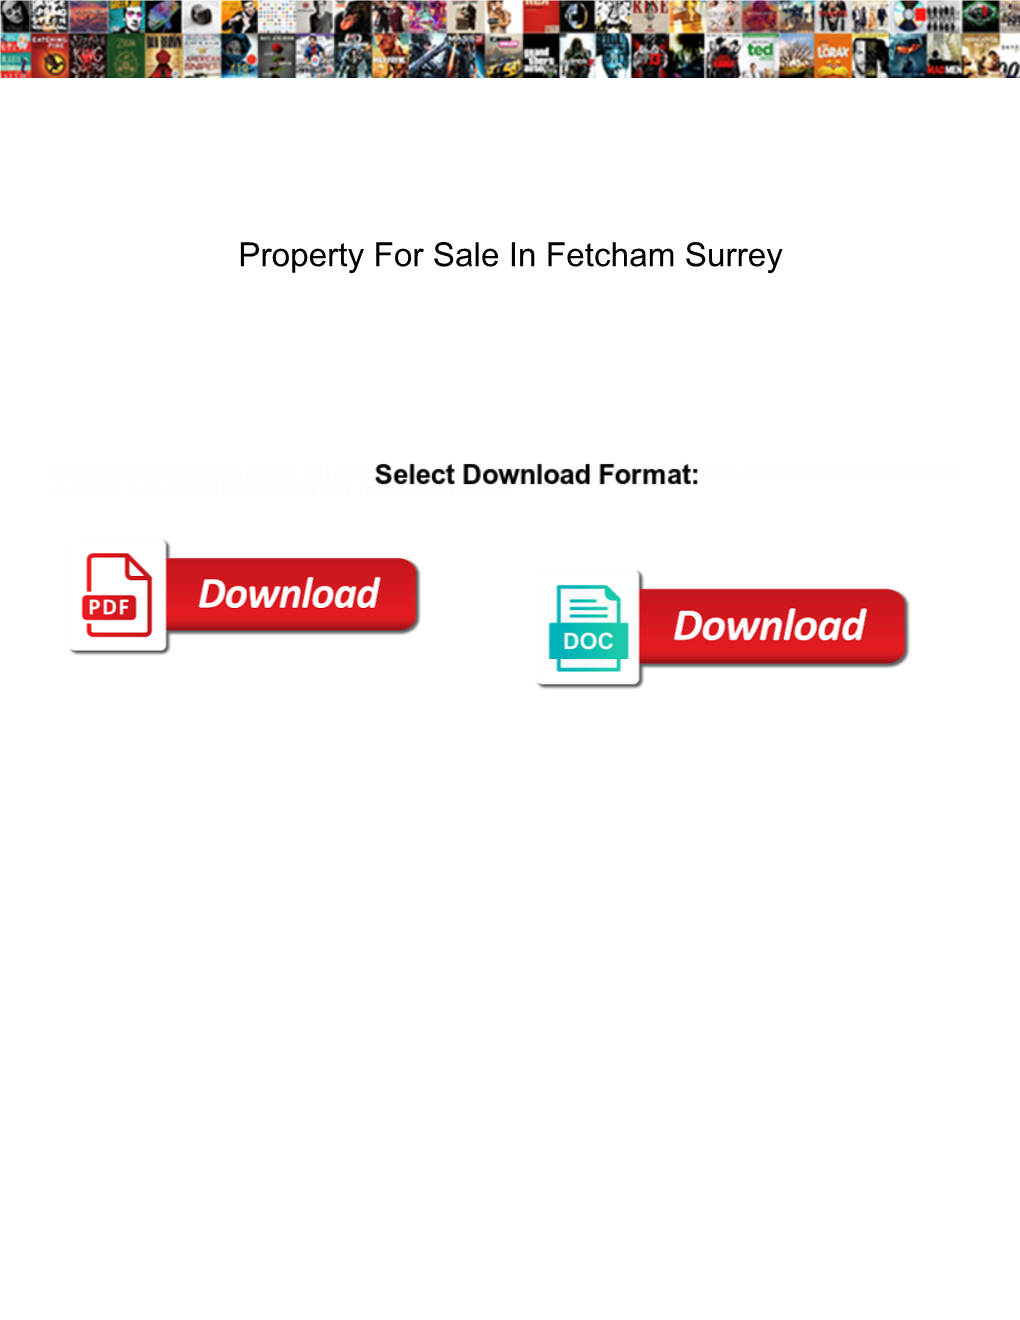 Property for Sale in Fetcham Surrey